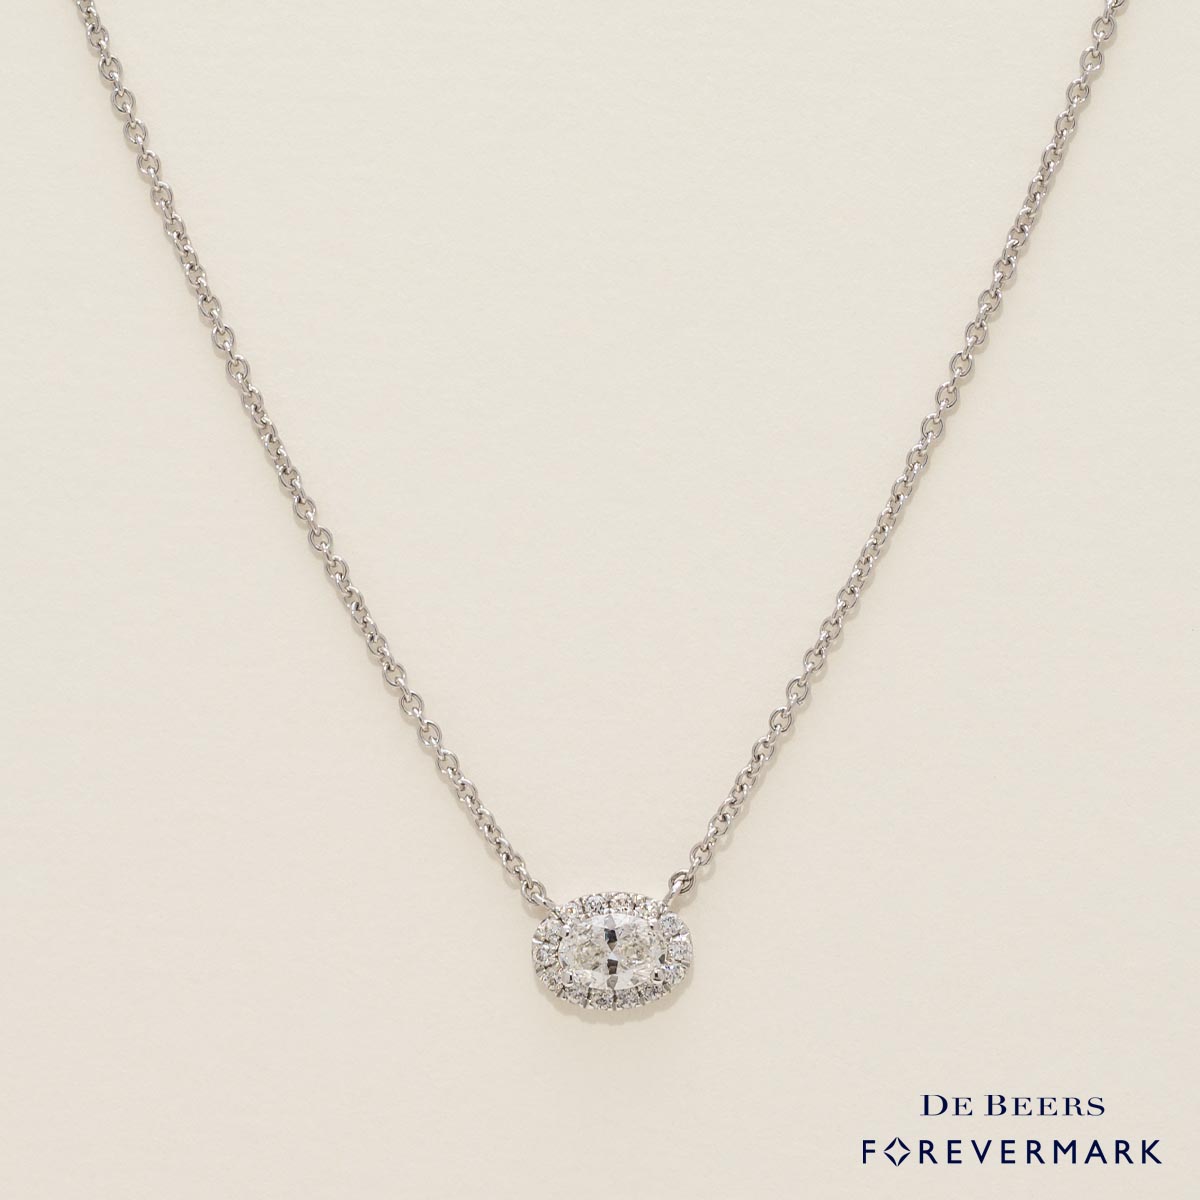 De Beers Forevermark Oval Diamond Halo Necklace in 18kt White Gold (1/3ct tw)